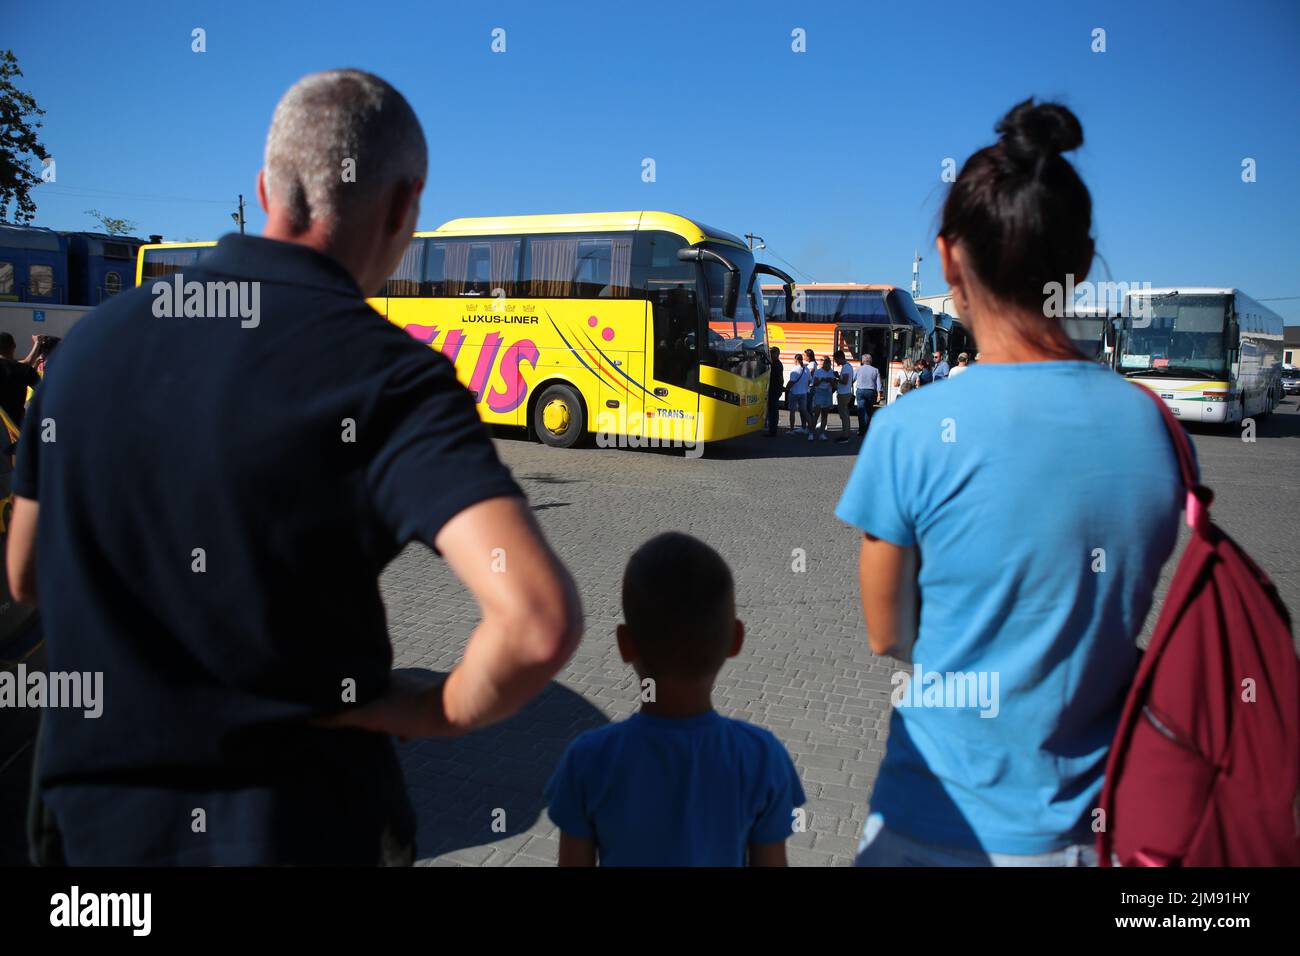 LVIV, UKRAINE - AUGUST 4, 2022 - A man, woman and child look at a bus at the Lviv railway station as one hundred children of internally displaced pers Stock Photo